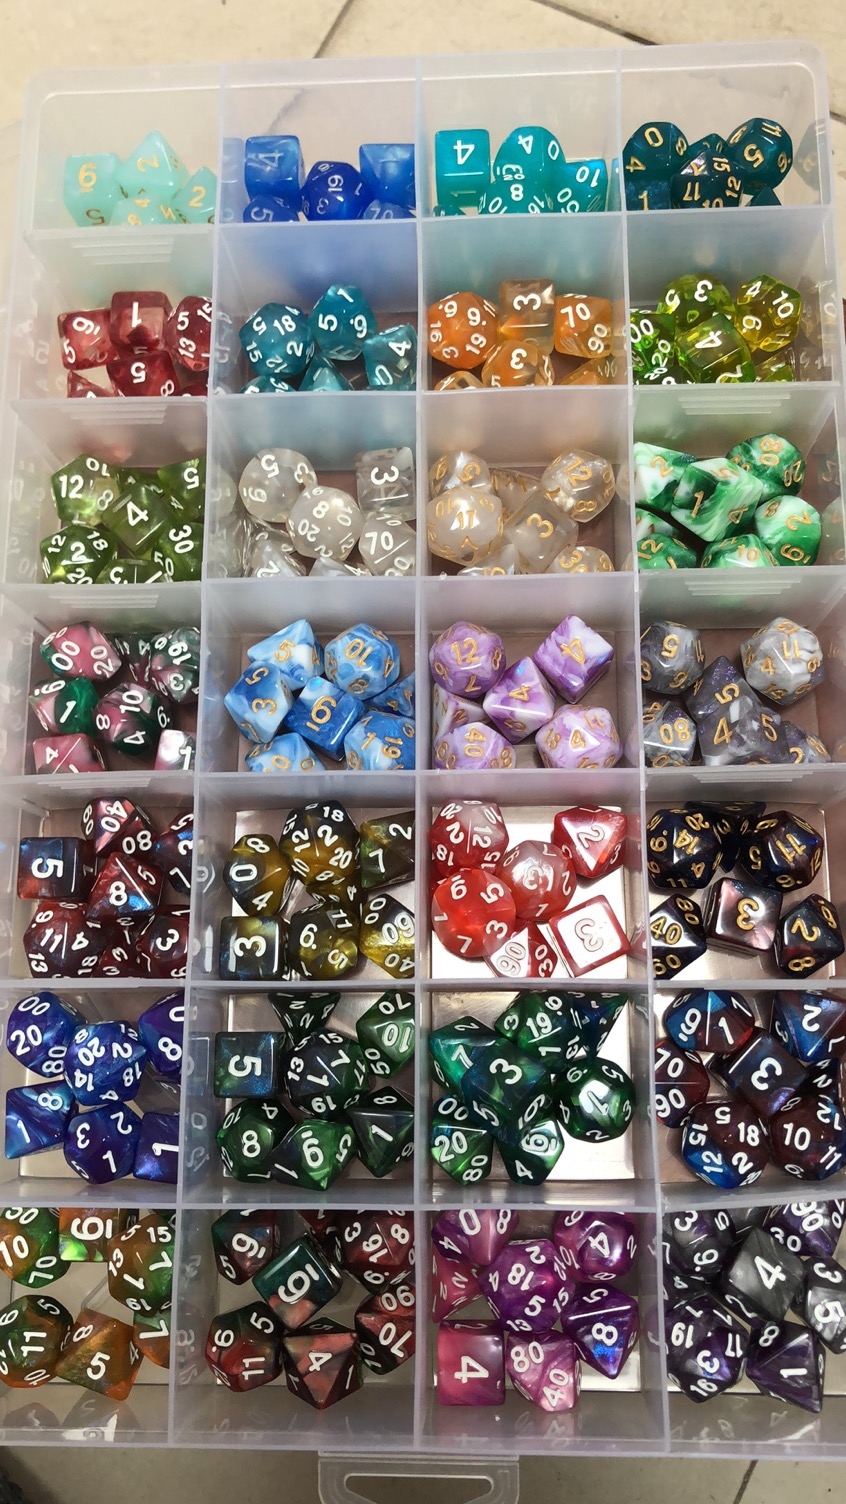 Spot supply of multi-sided dice (4, 6, 8, 10, 12, 20)